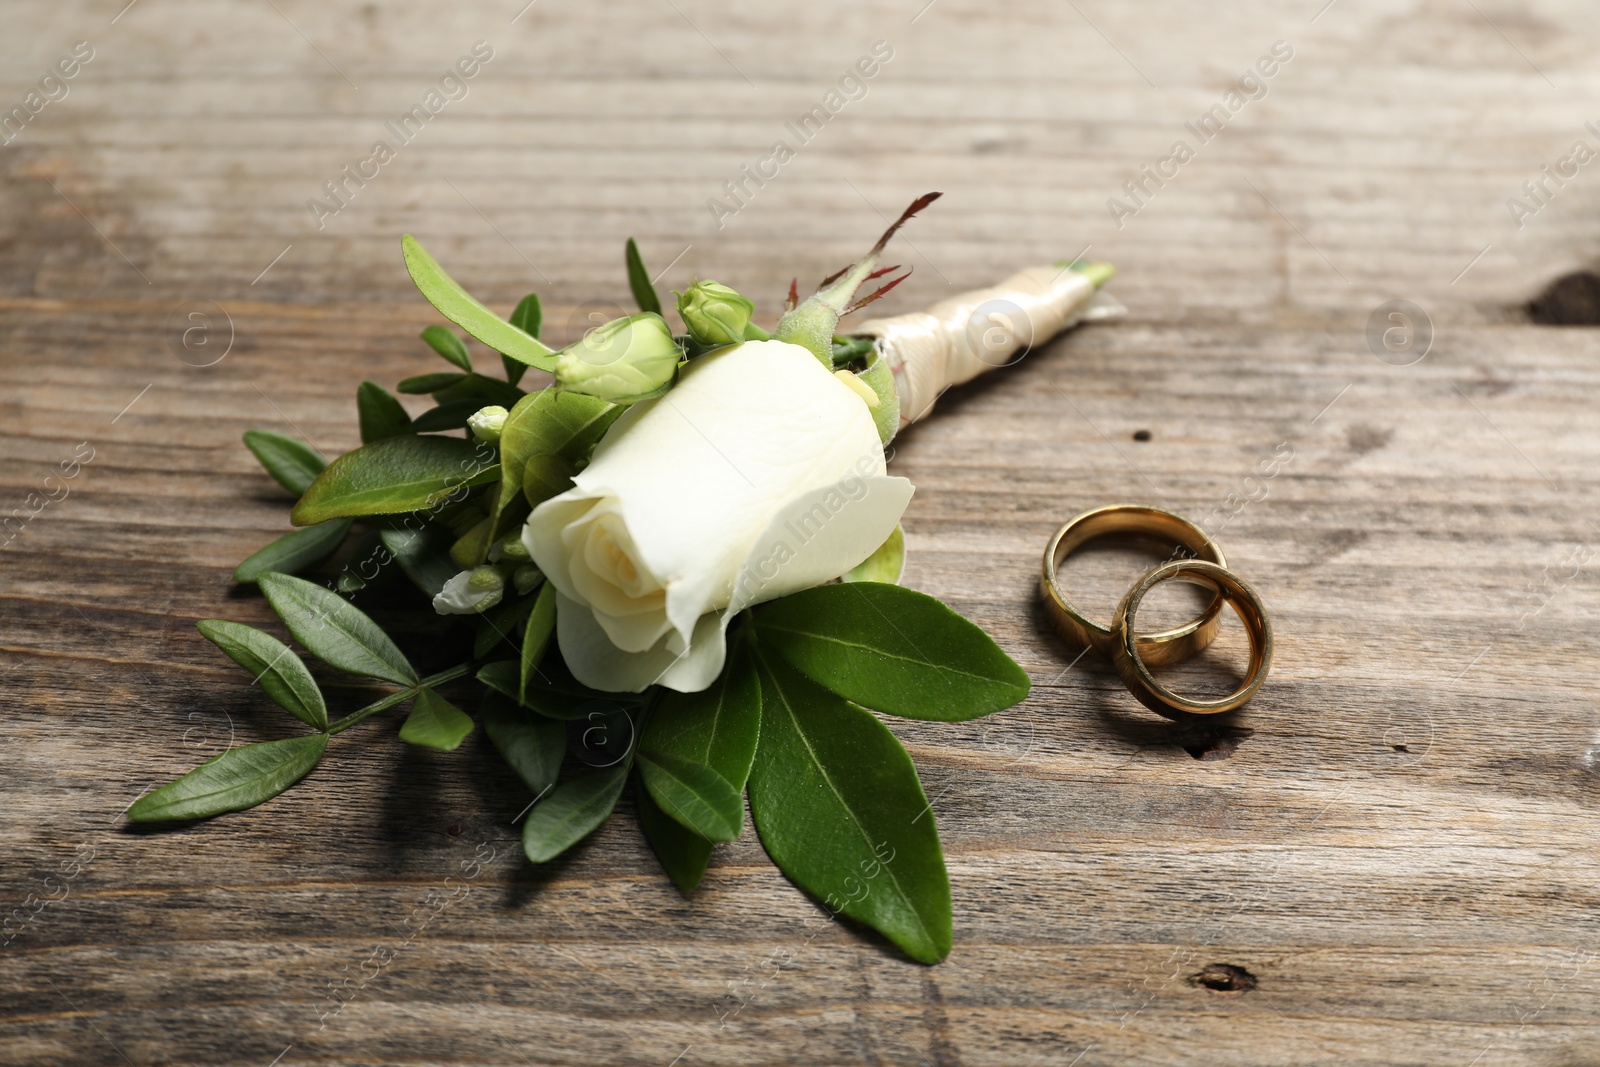 Photo of Wedding stuff. Stylish boutonniere and rings on wooden table, closeup